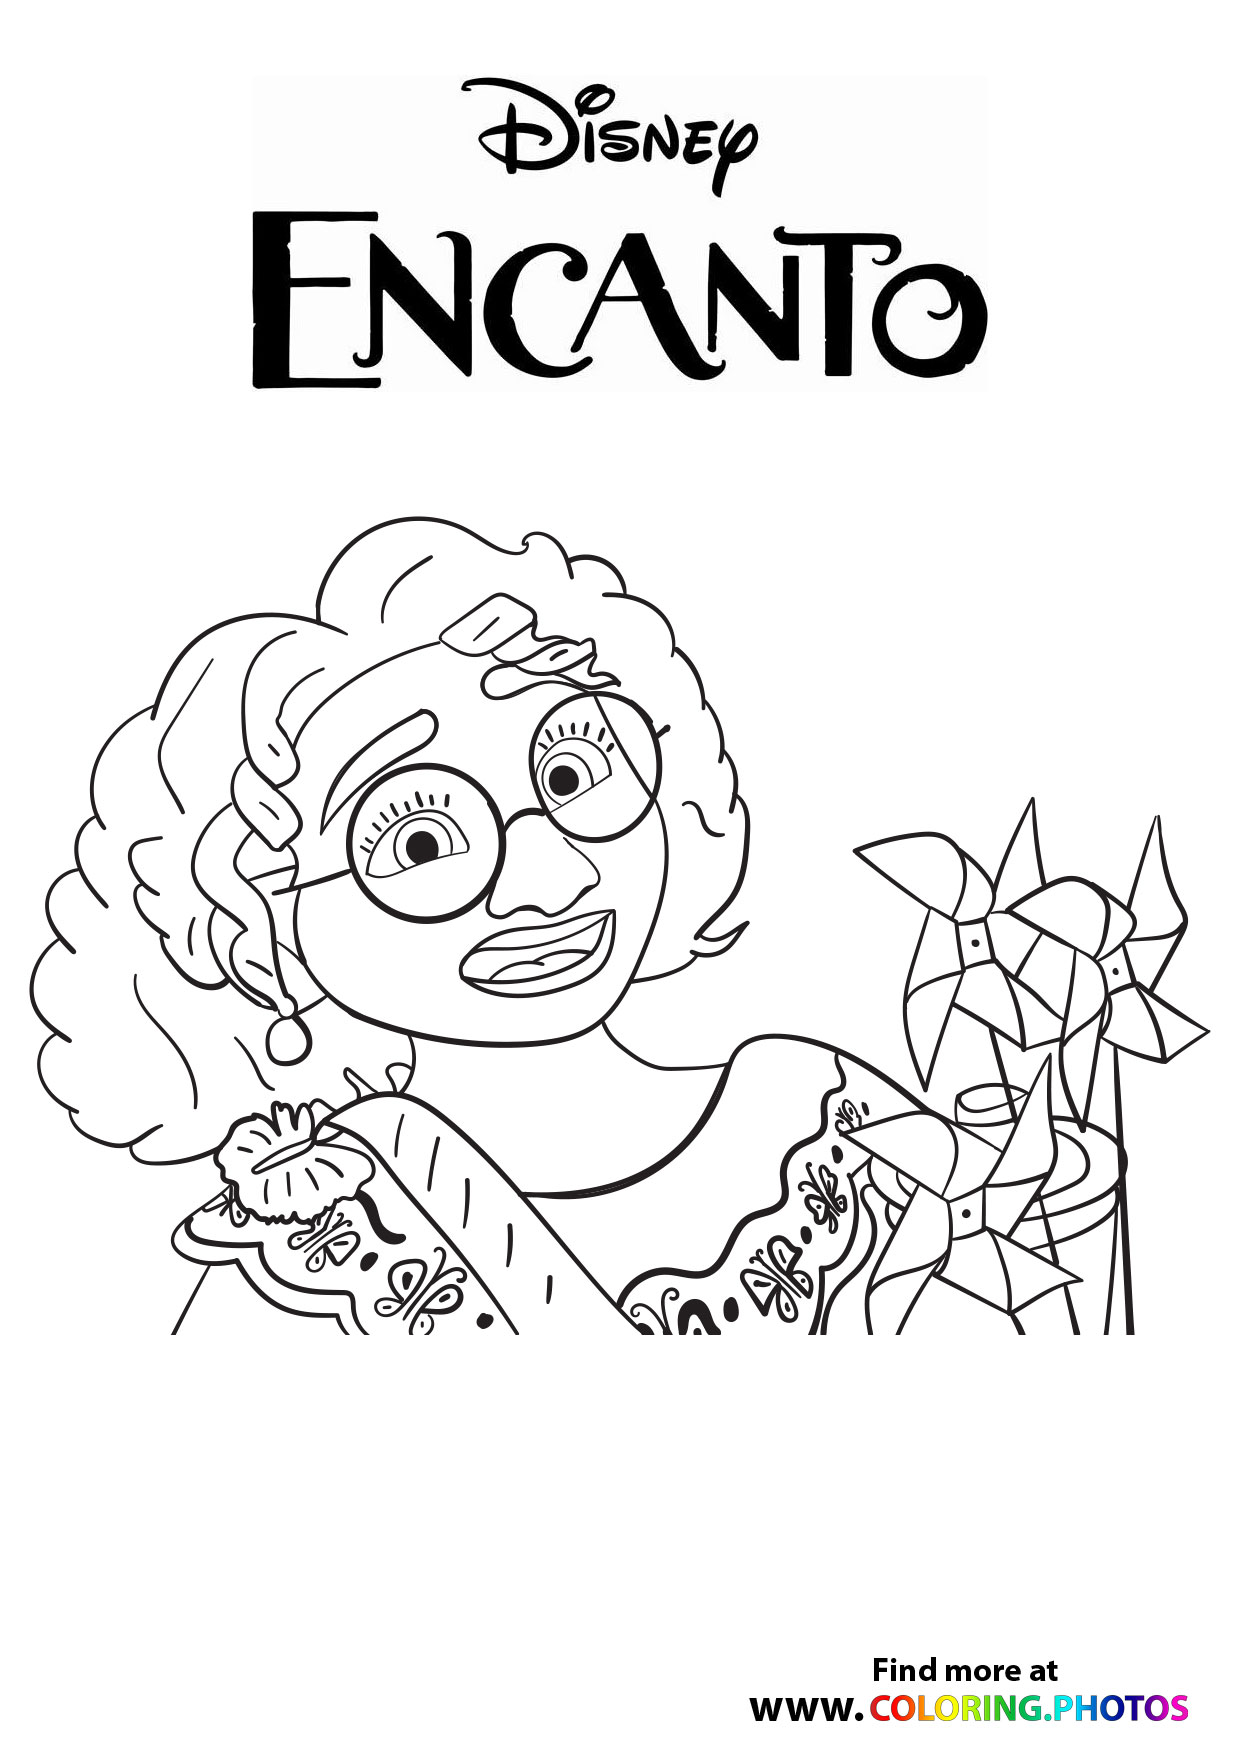 Disney Encanto Coloring Pages for kids Free coloring pages for print out